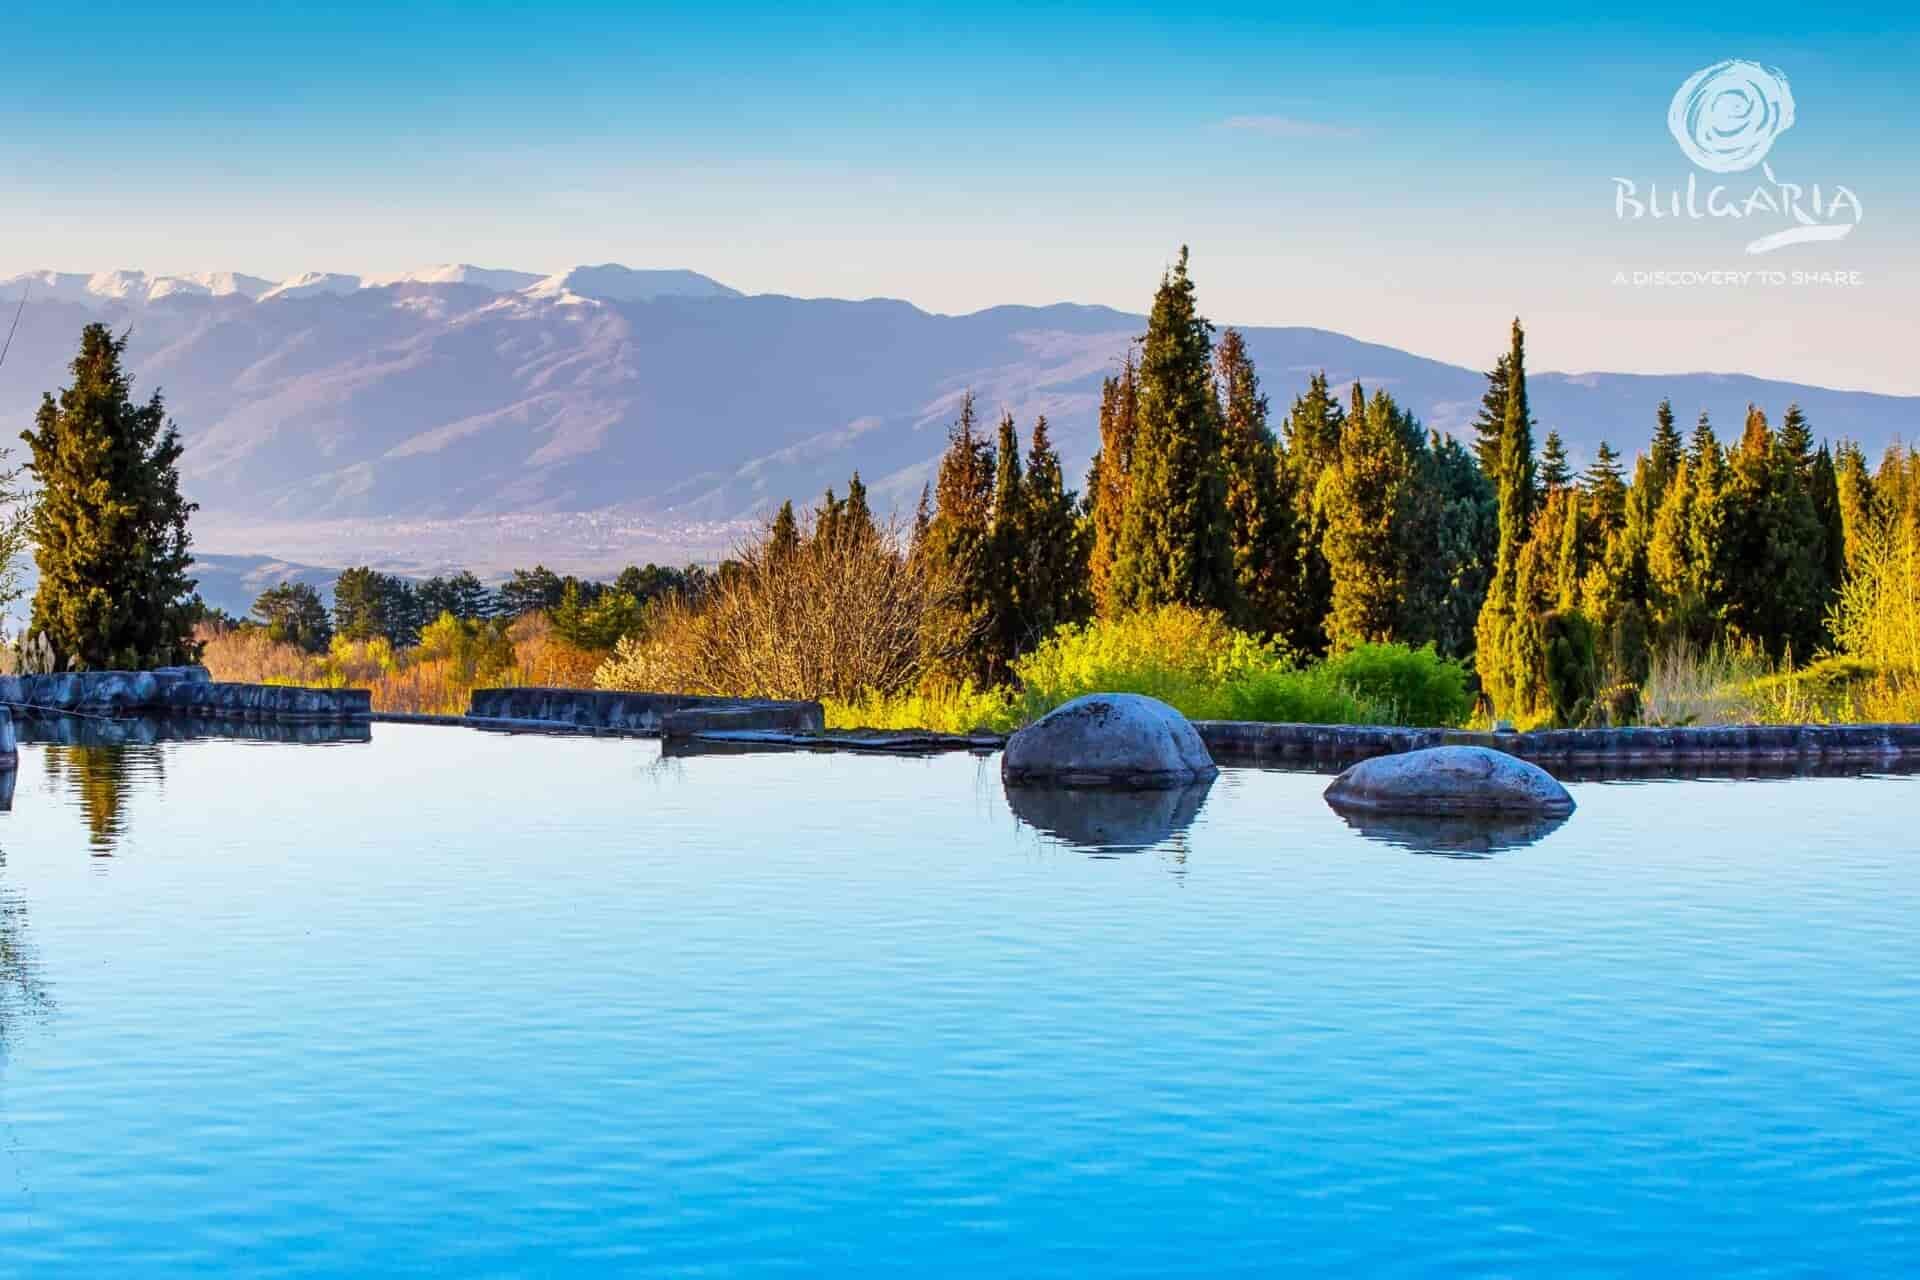 Scenic pool surrounded by rocks with majestic mountains in the background.